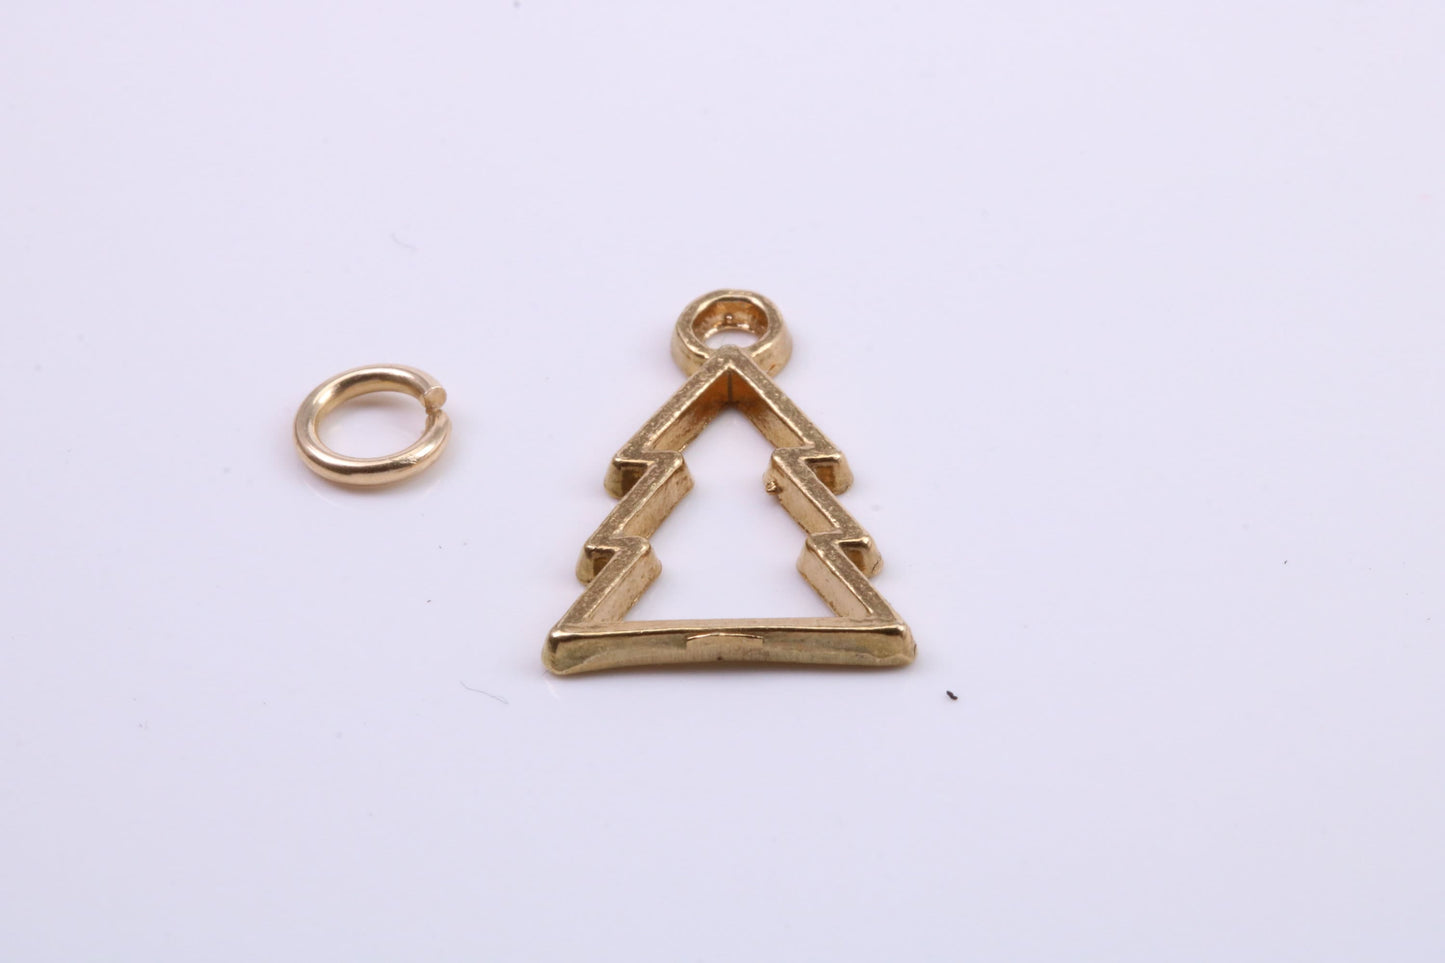 Christmas Tree Charm, Traditional Charm, Made from Solid 9ct Yellow Gold, British Hallmarked, Complete with Attachment Link